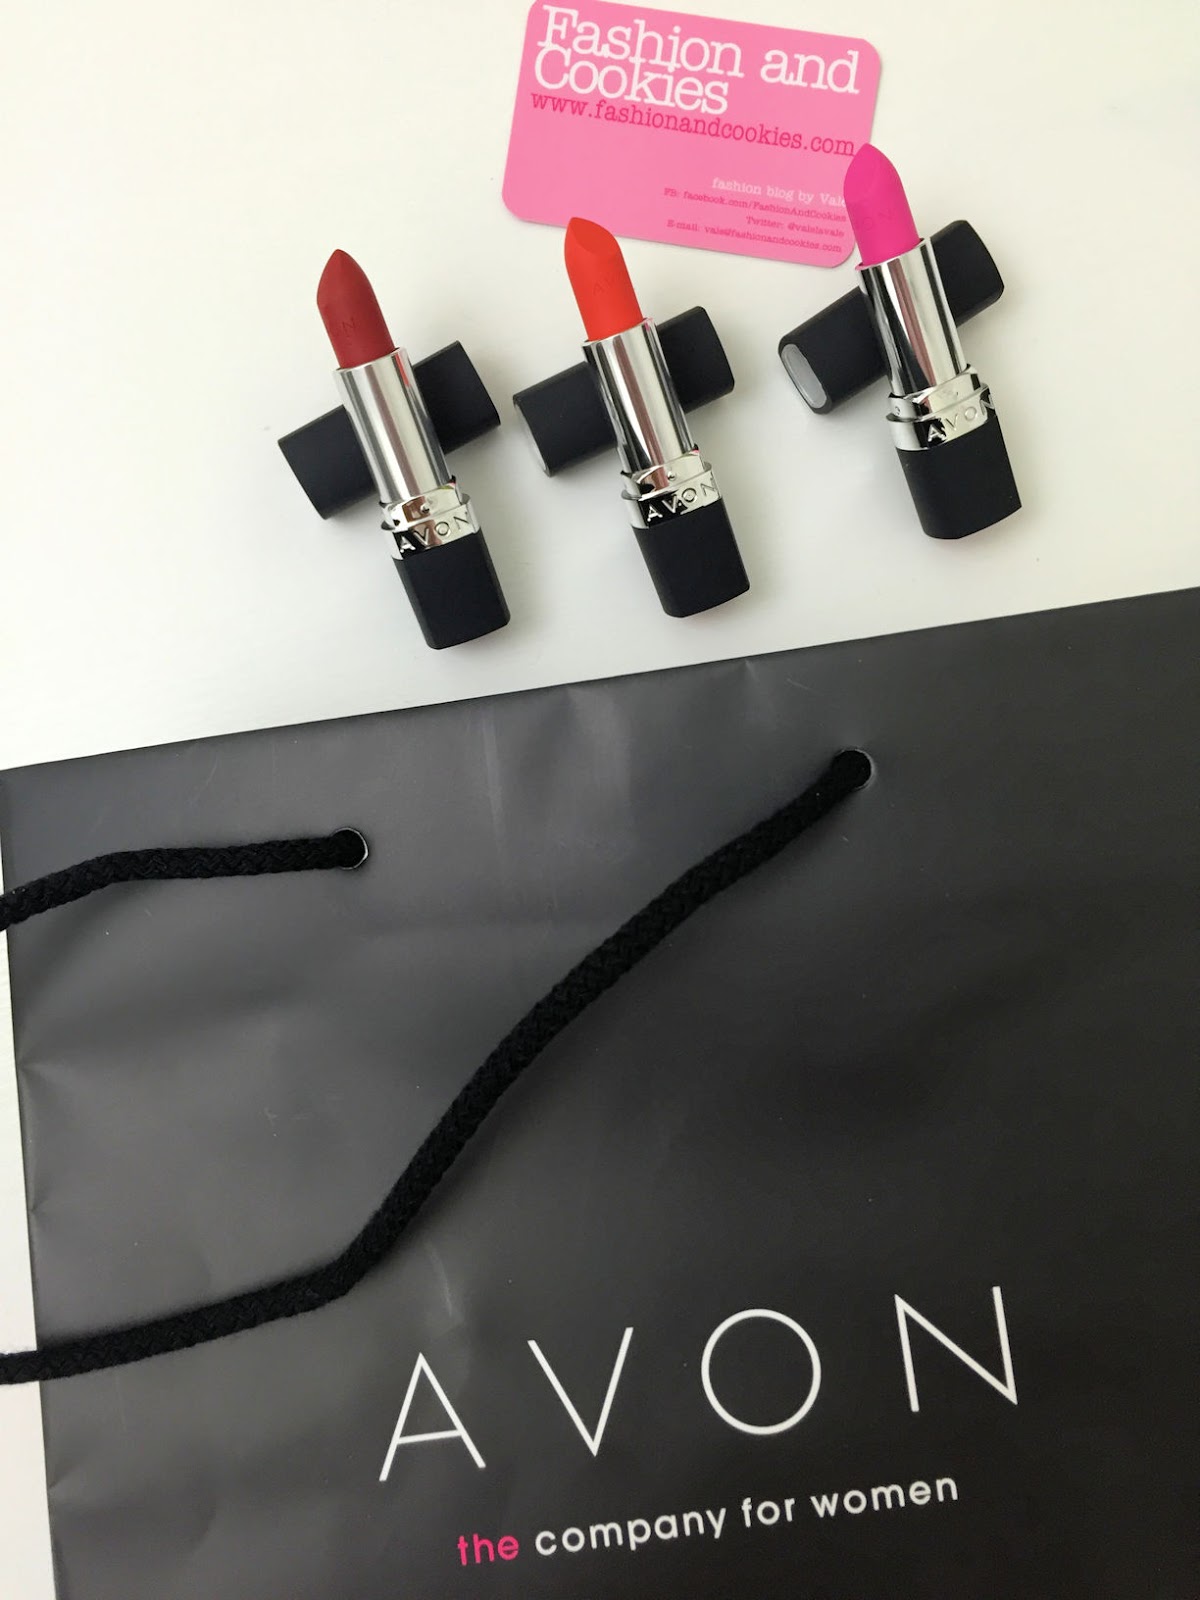 Avon Perfectly Matte Lipstick review and swatches on Fashion and Cookies beauty blog, beauty blogger